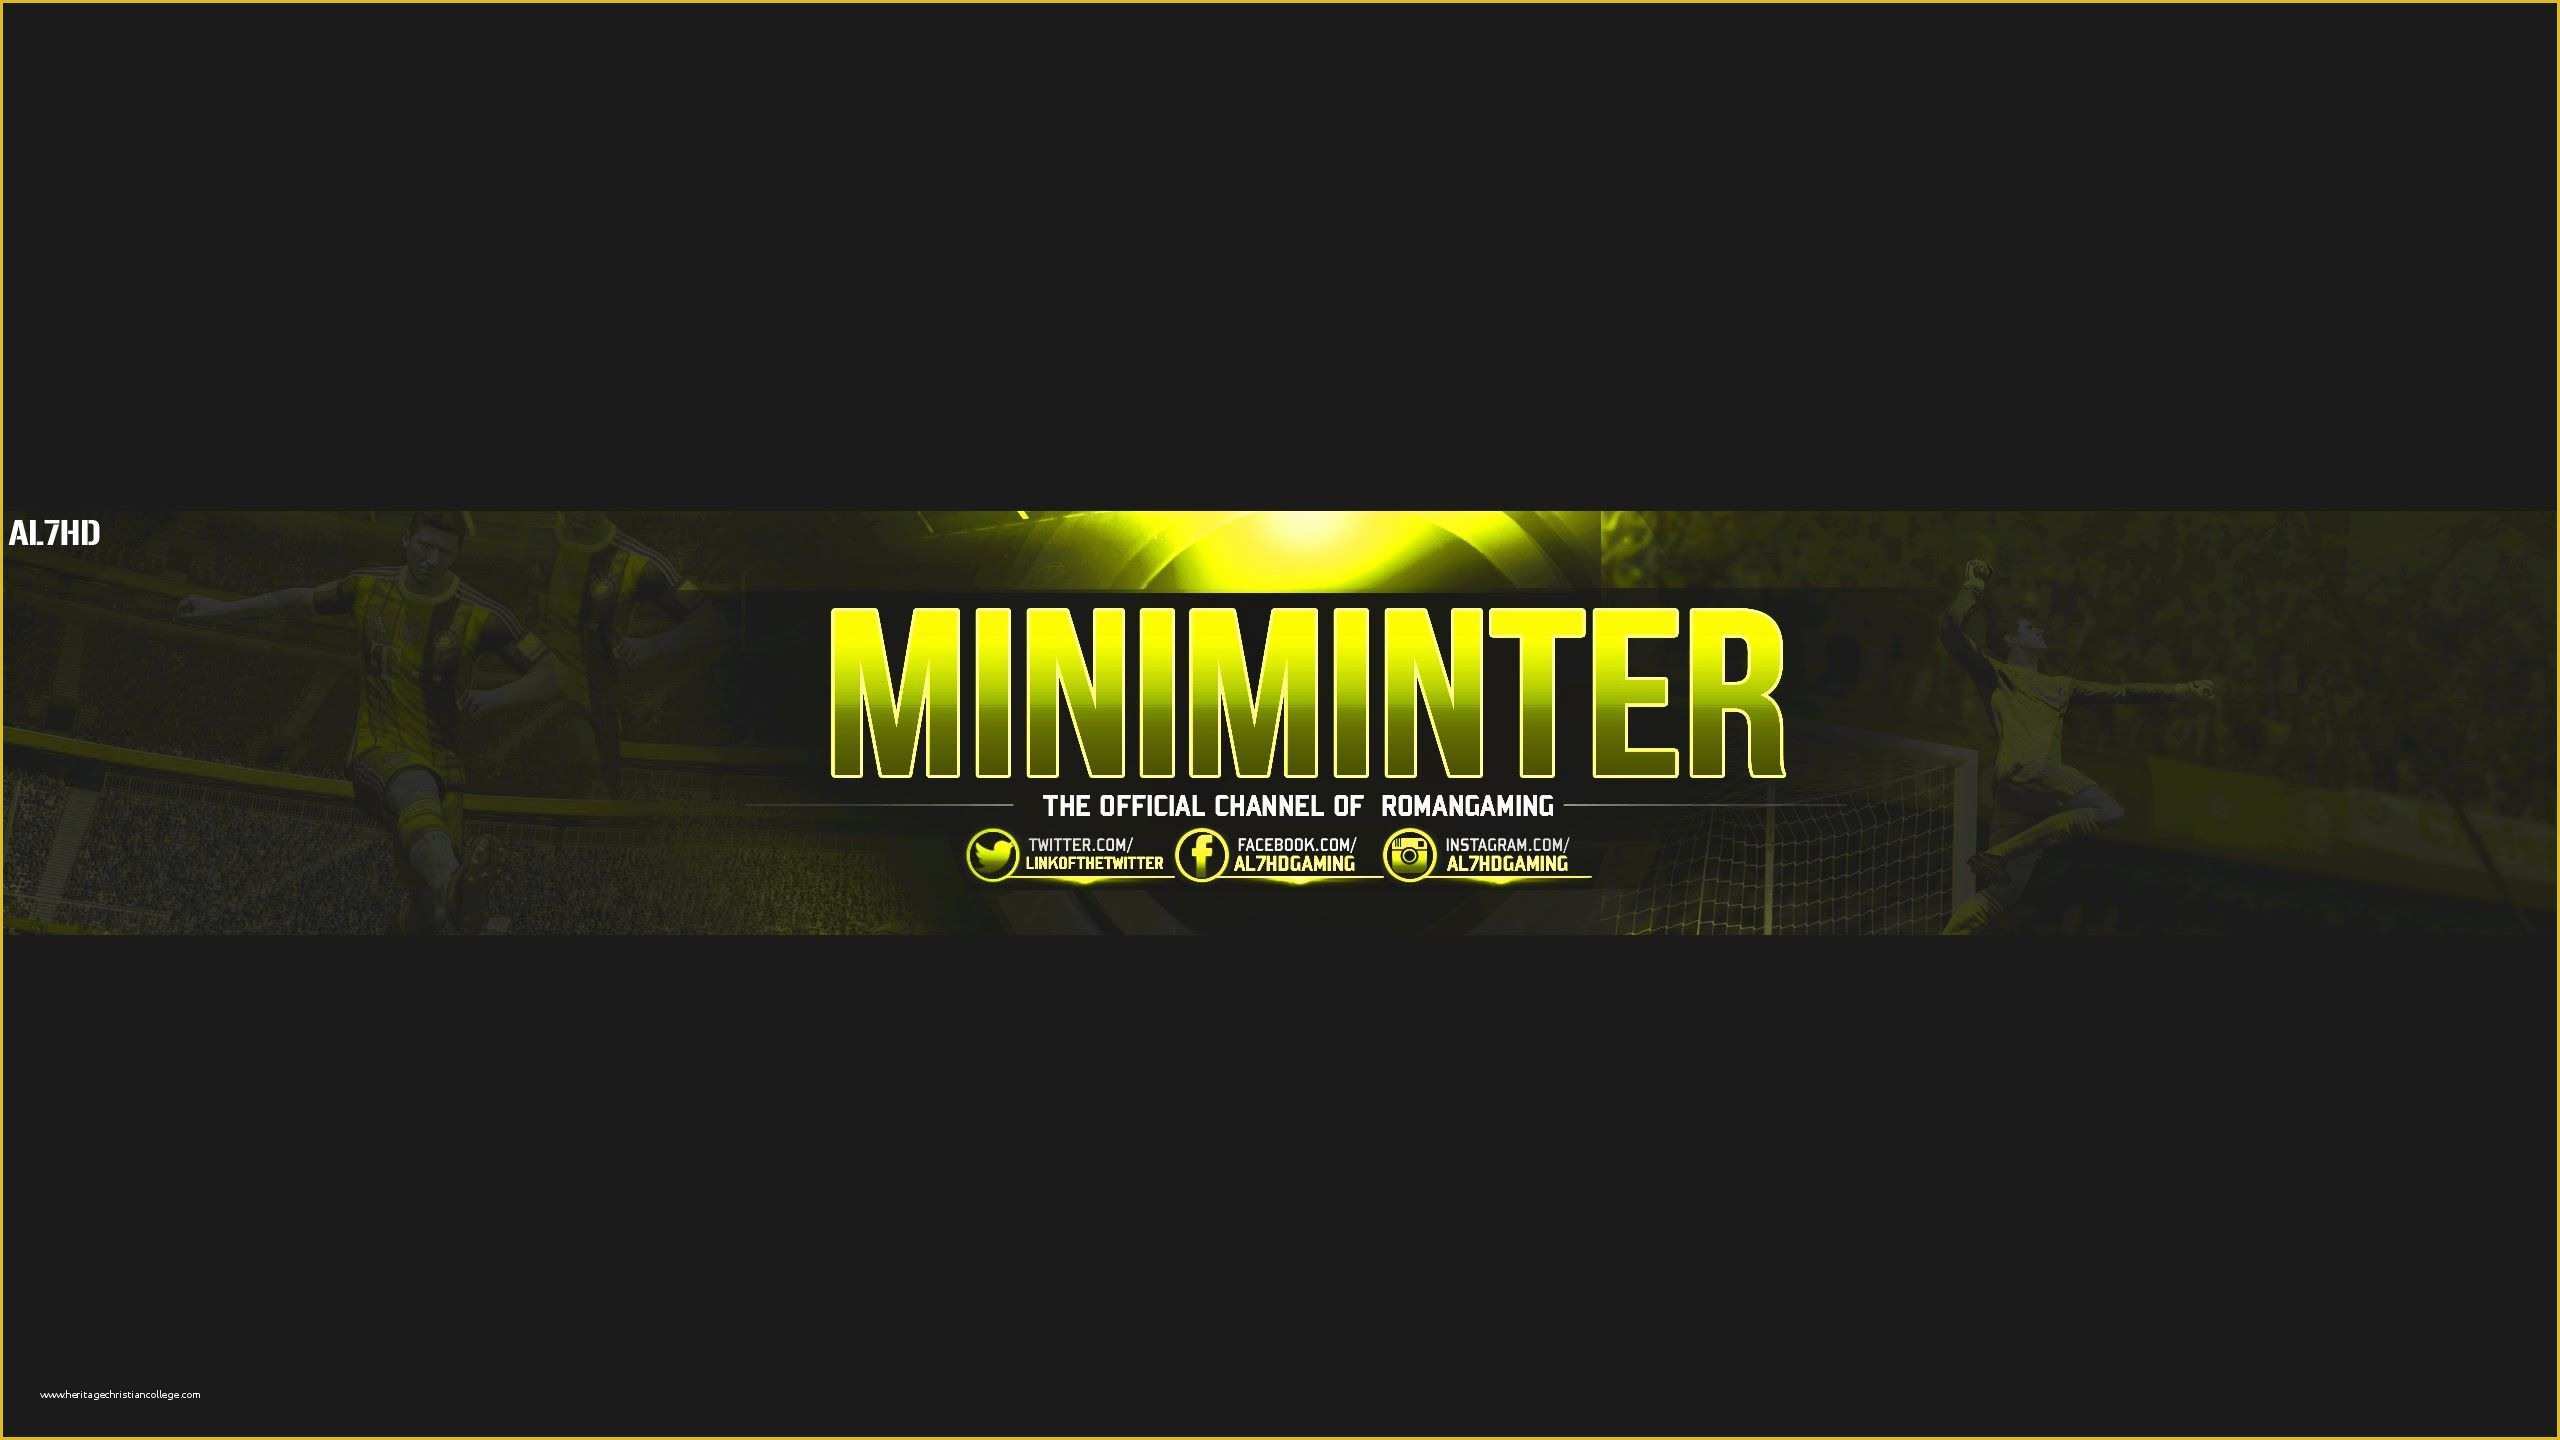 Youtube Banner Template Gaming